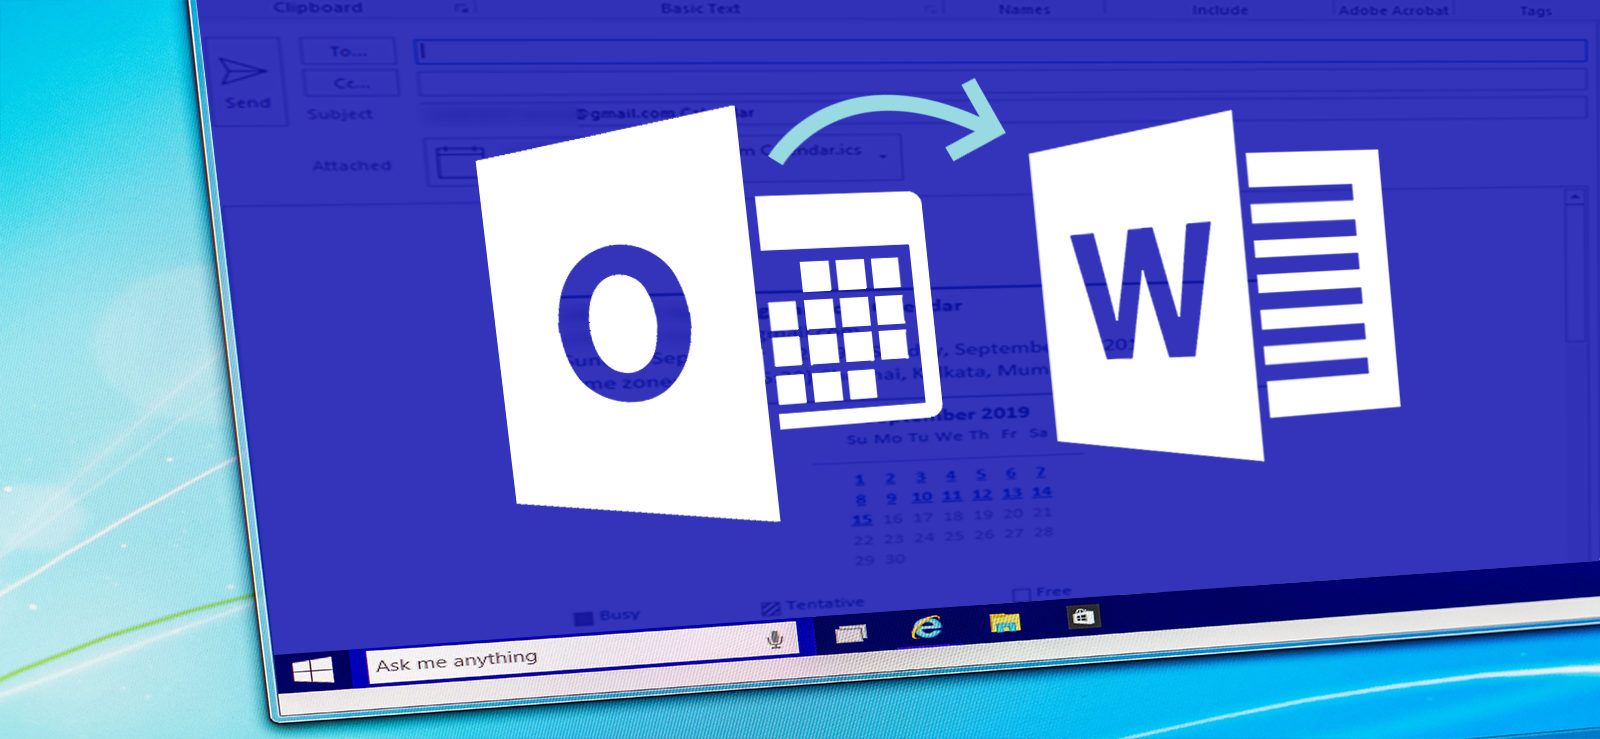 How to Export Outlook Calendar to Word?